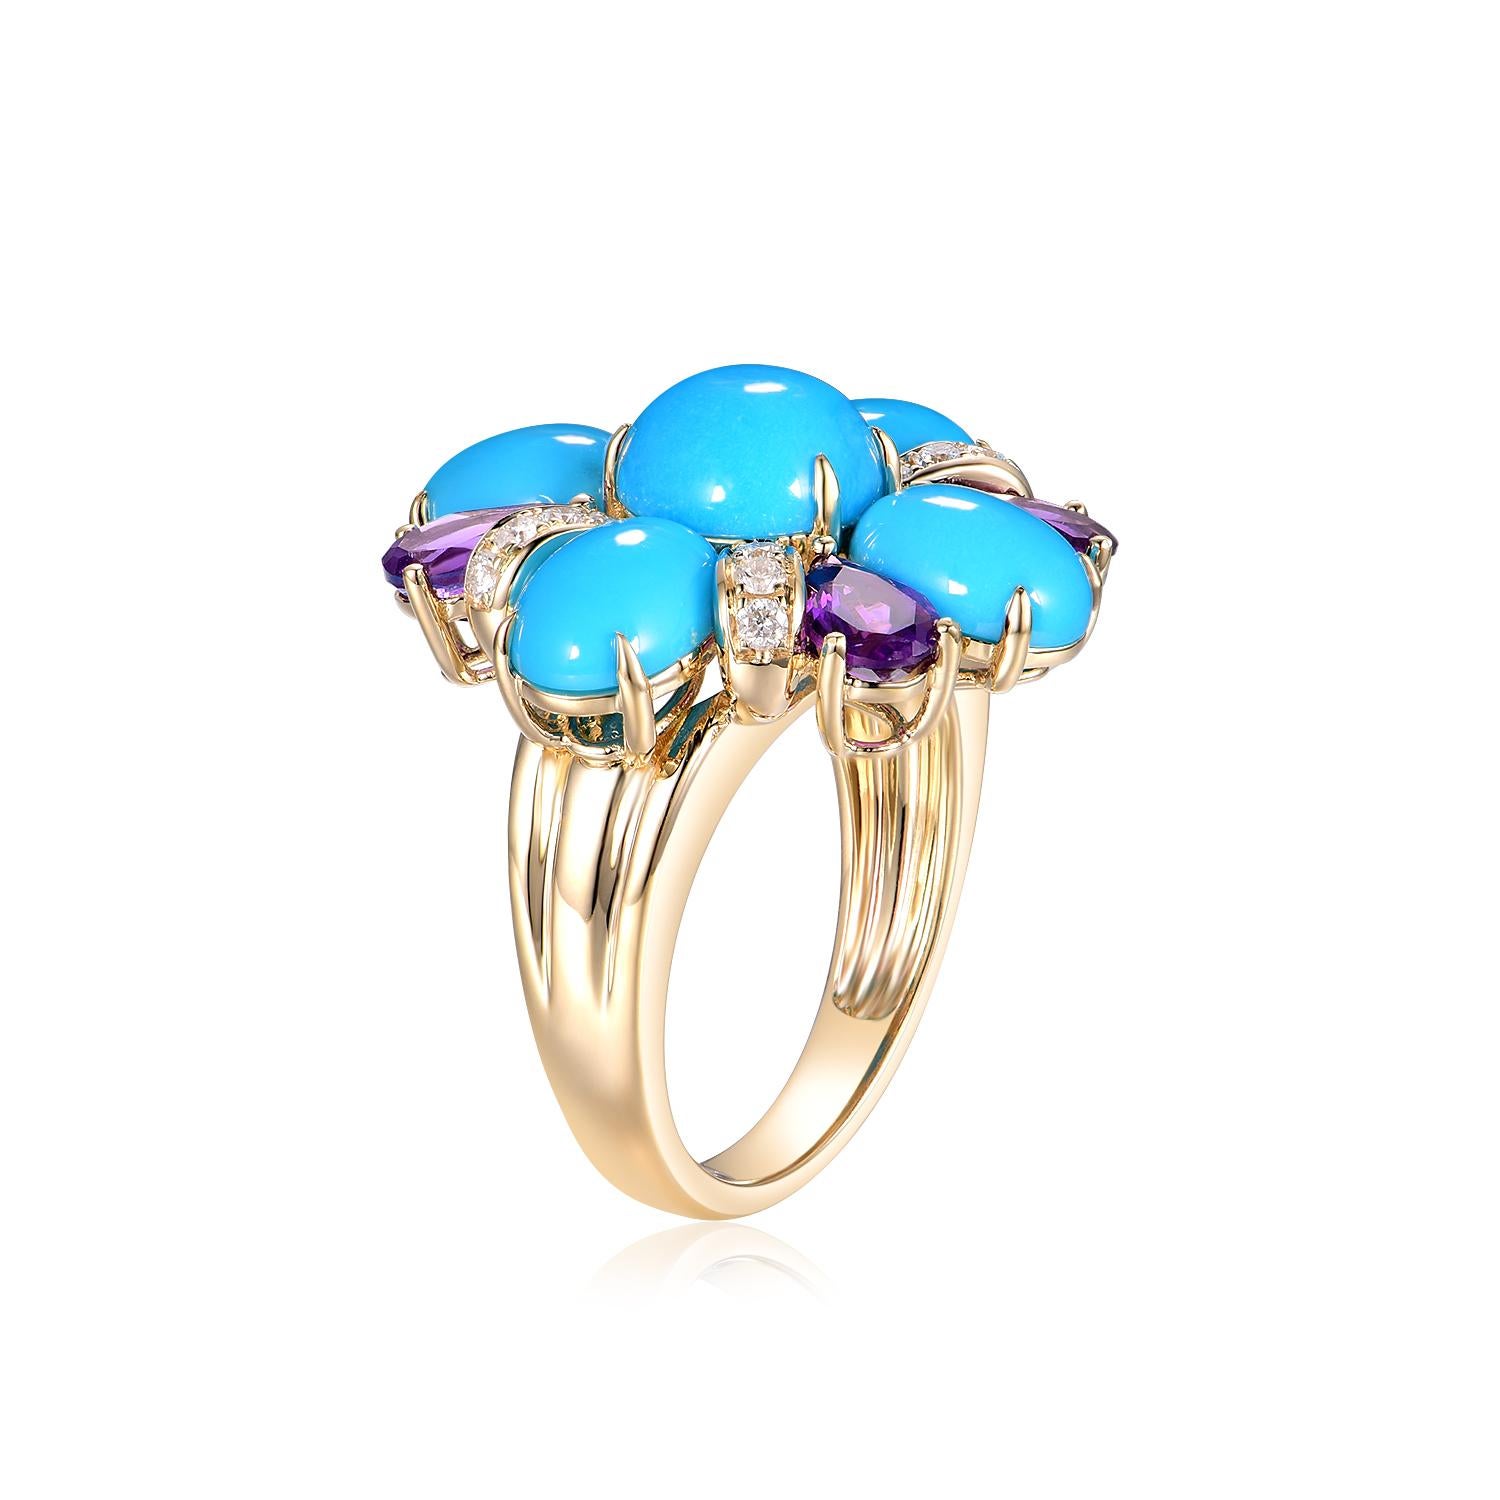 This exquisite floral-inspired ring is a celebration of color and elegance, crafted from 14-karat yellow gold. At its center, the ring features two turquoise stones totaling 1.87 carats, their sky-blue tones reminiscent of tranquil